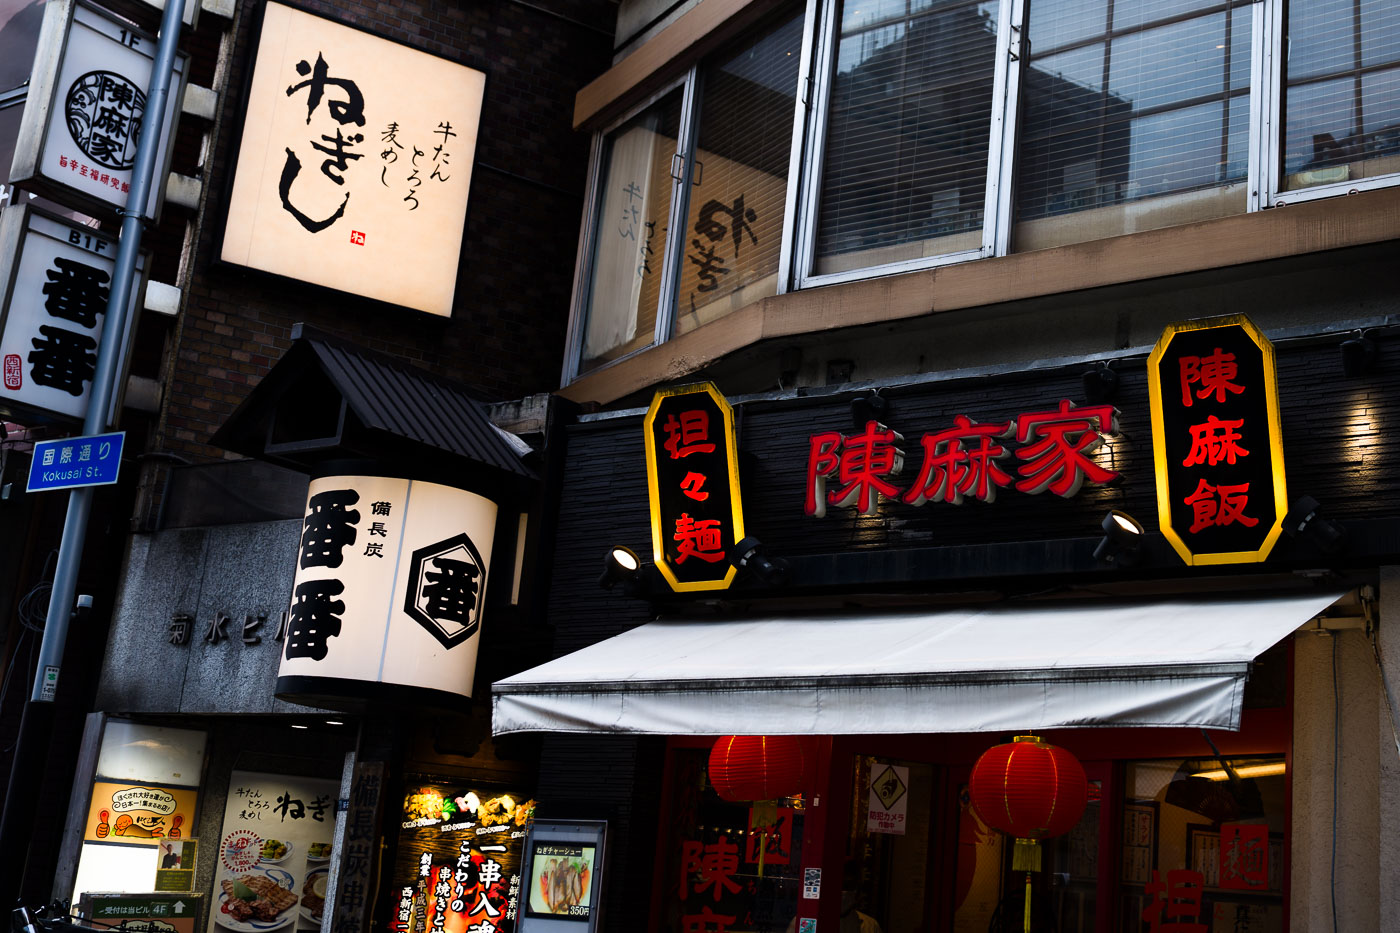 Exterior of a restaurant in Tokyo Japan